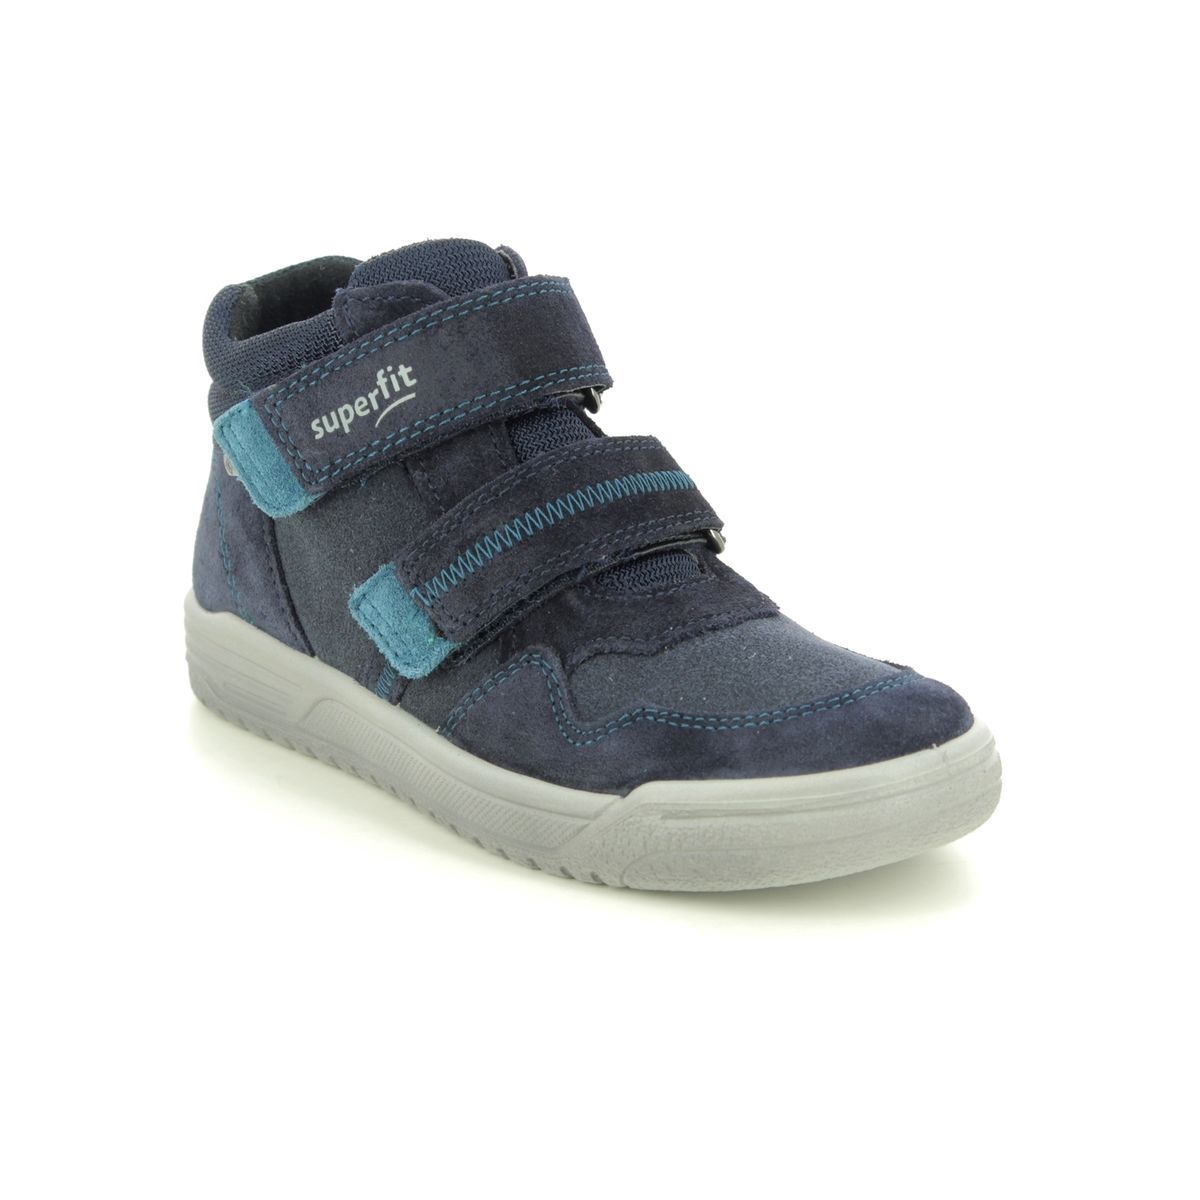 Superfit Earth Gtx Vel Navy Suede Kids Boys Boots 1009057-8000 In Size 31 In Plain Navy Suede For kids